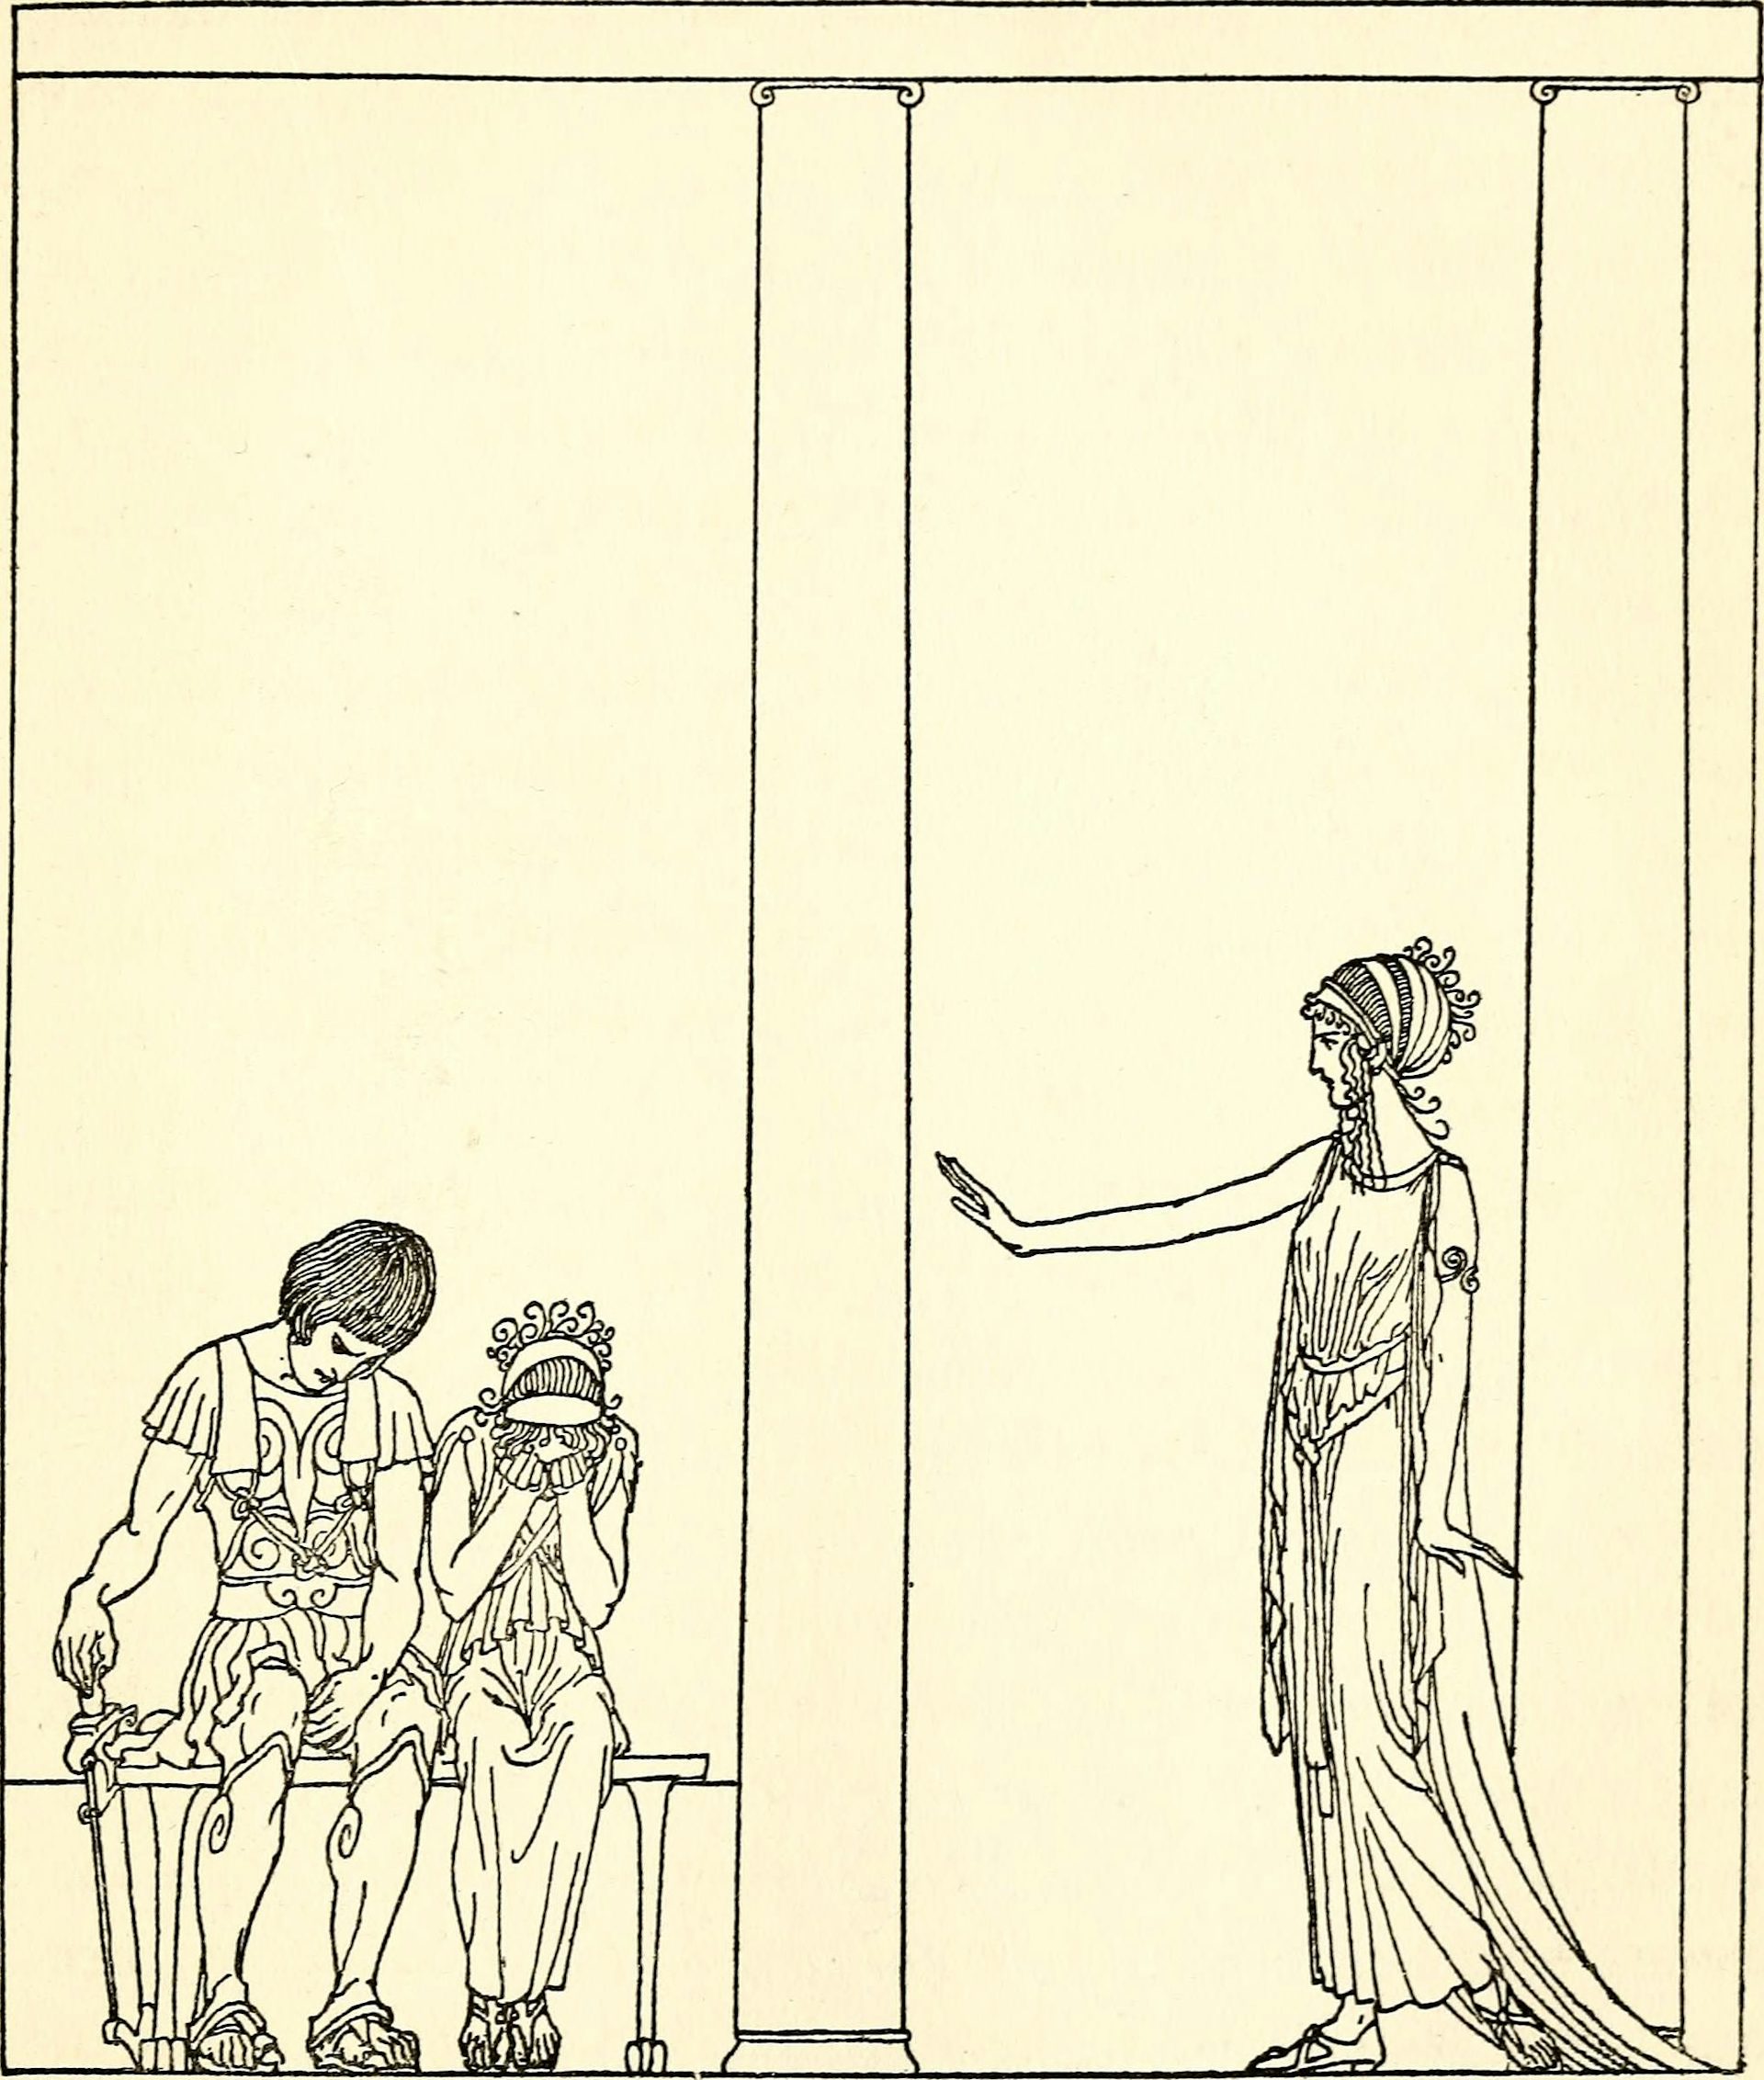 Medea and Jason seeking purification from Circe. Drawn by Willy Pogány.